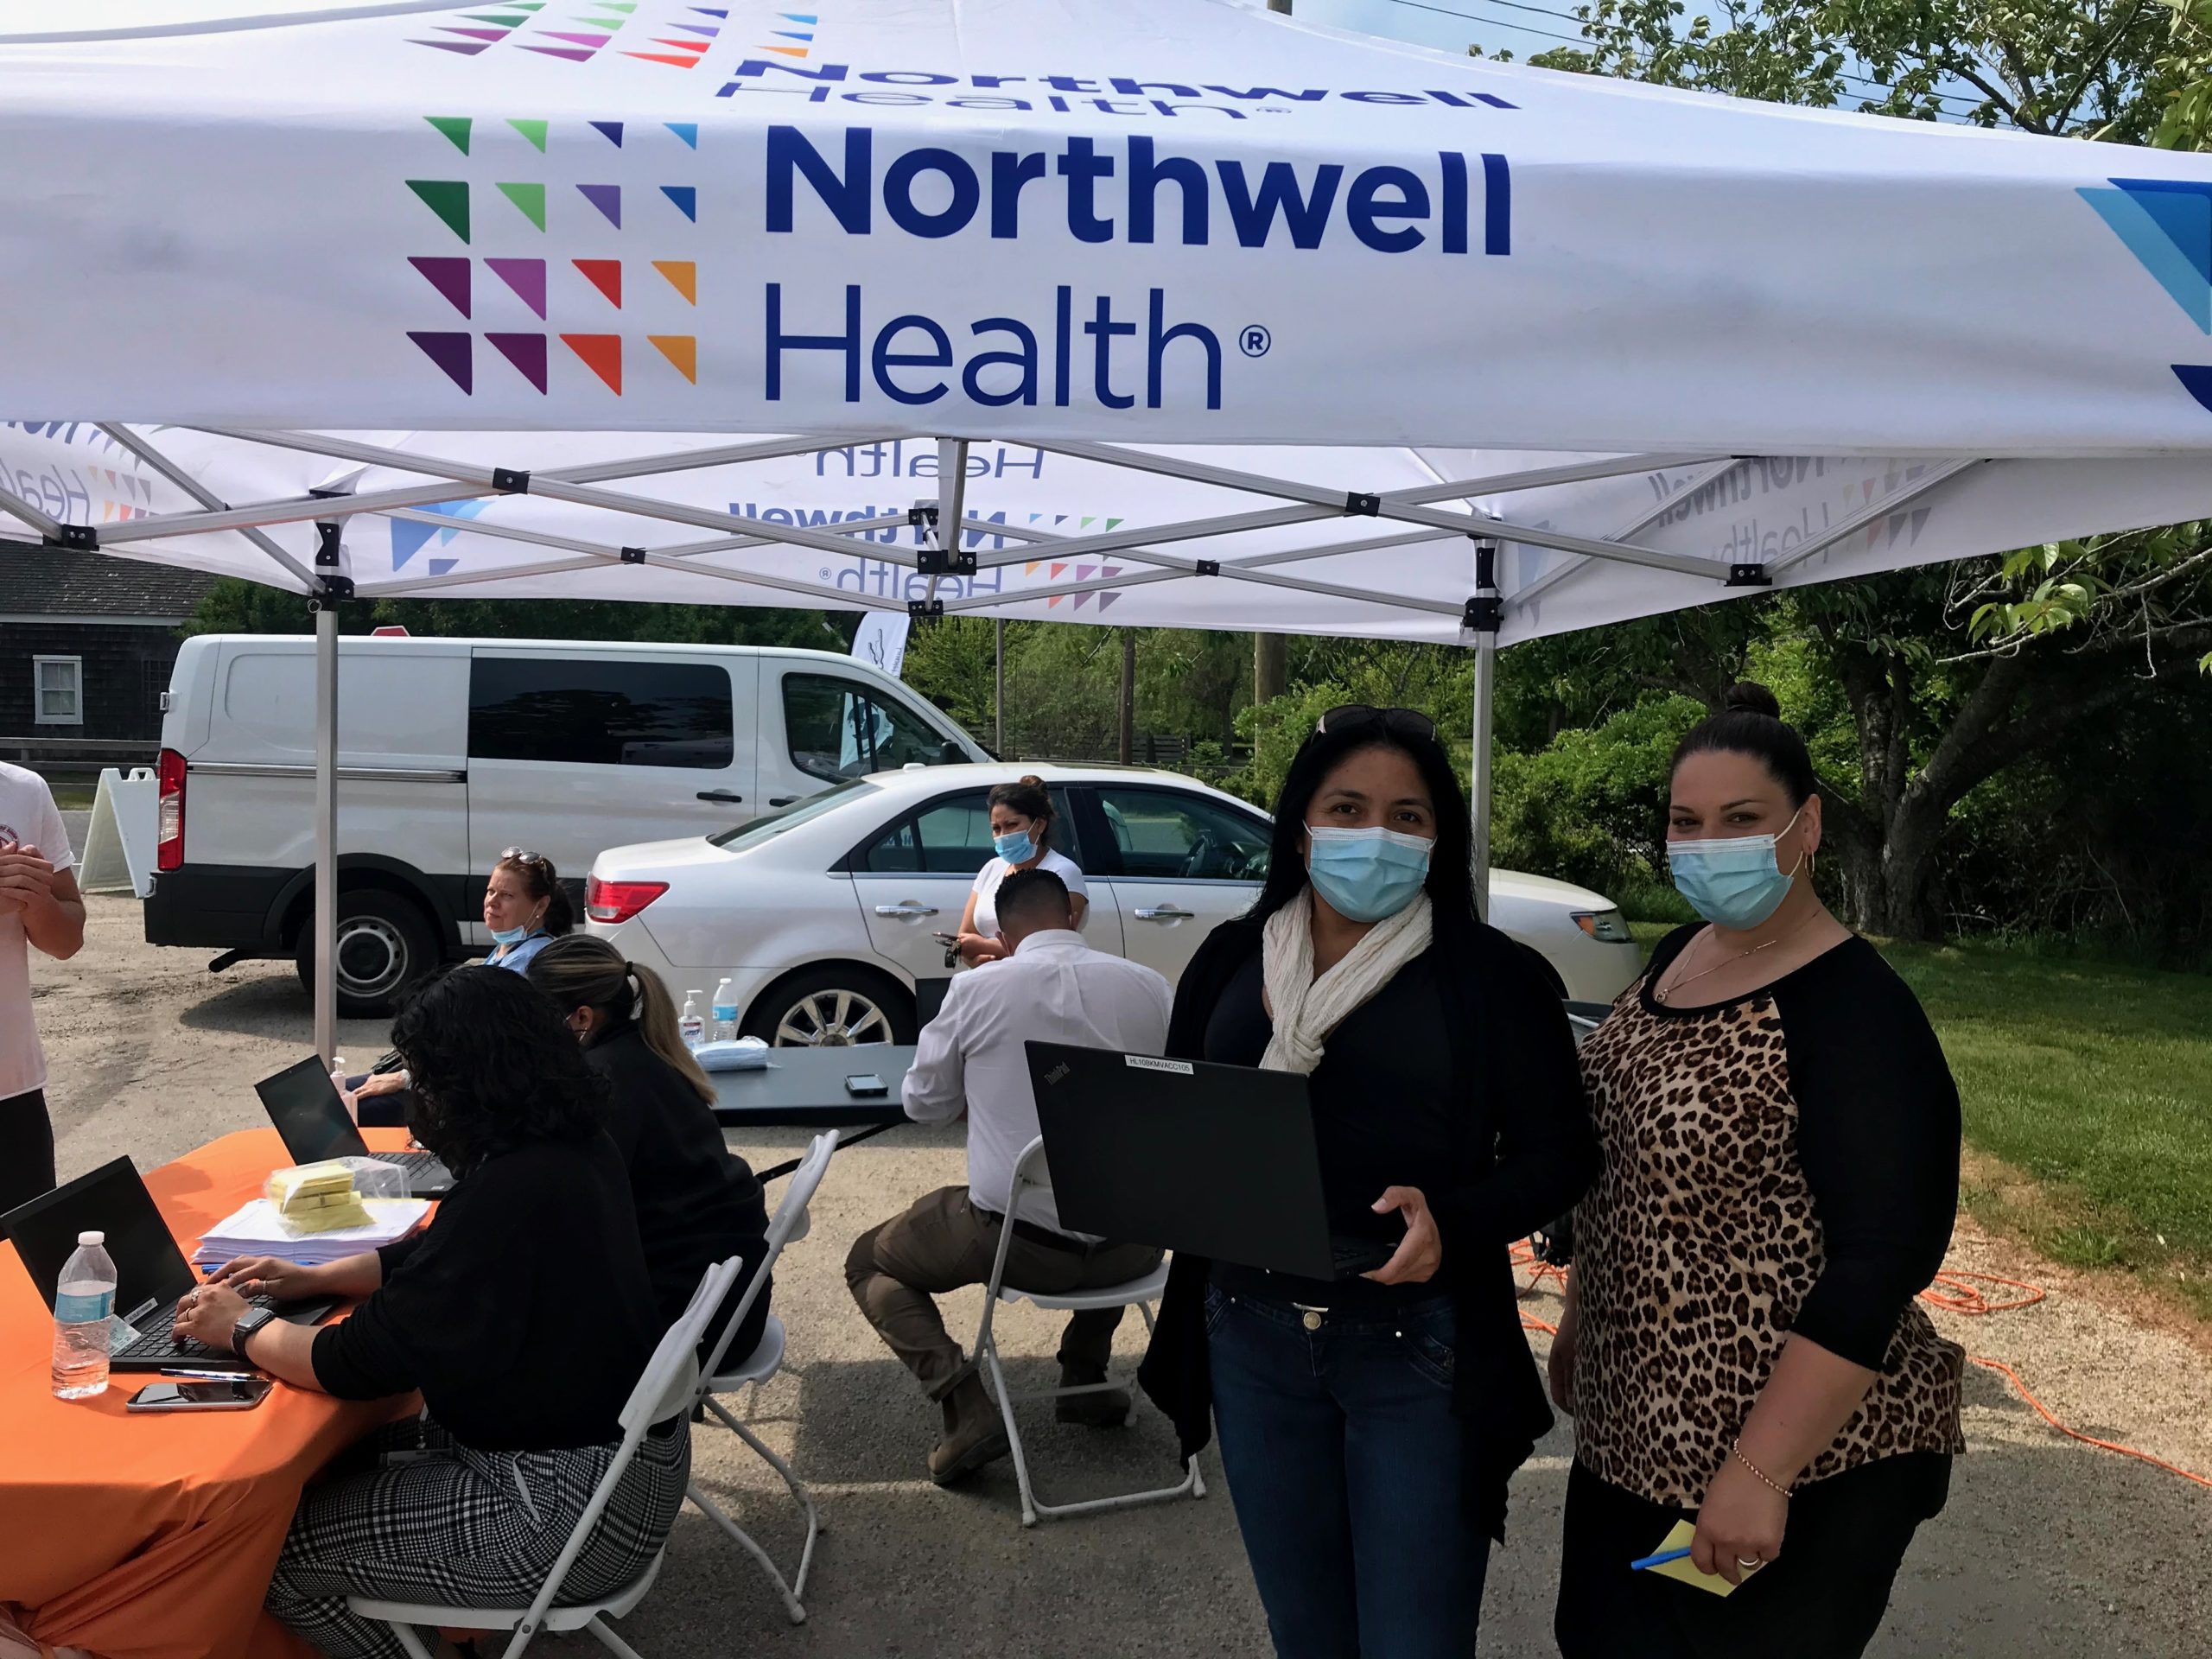 Erika Padilla, left, and Wally Ramirez of OLA of Eastern Long Island, helped organize a vaccination POD with Northwell Health at the Springs Food Pantry earlier this year in an effort to reach unvaccinated individuals in the Latino immigrant community.